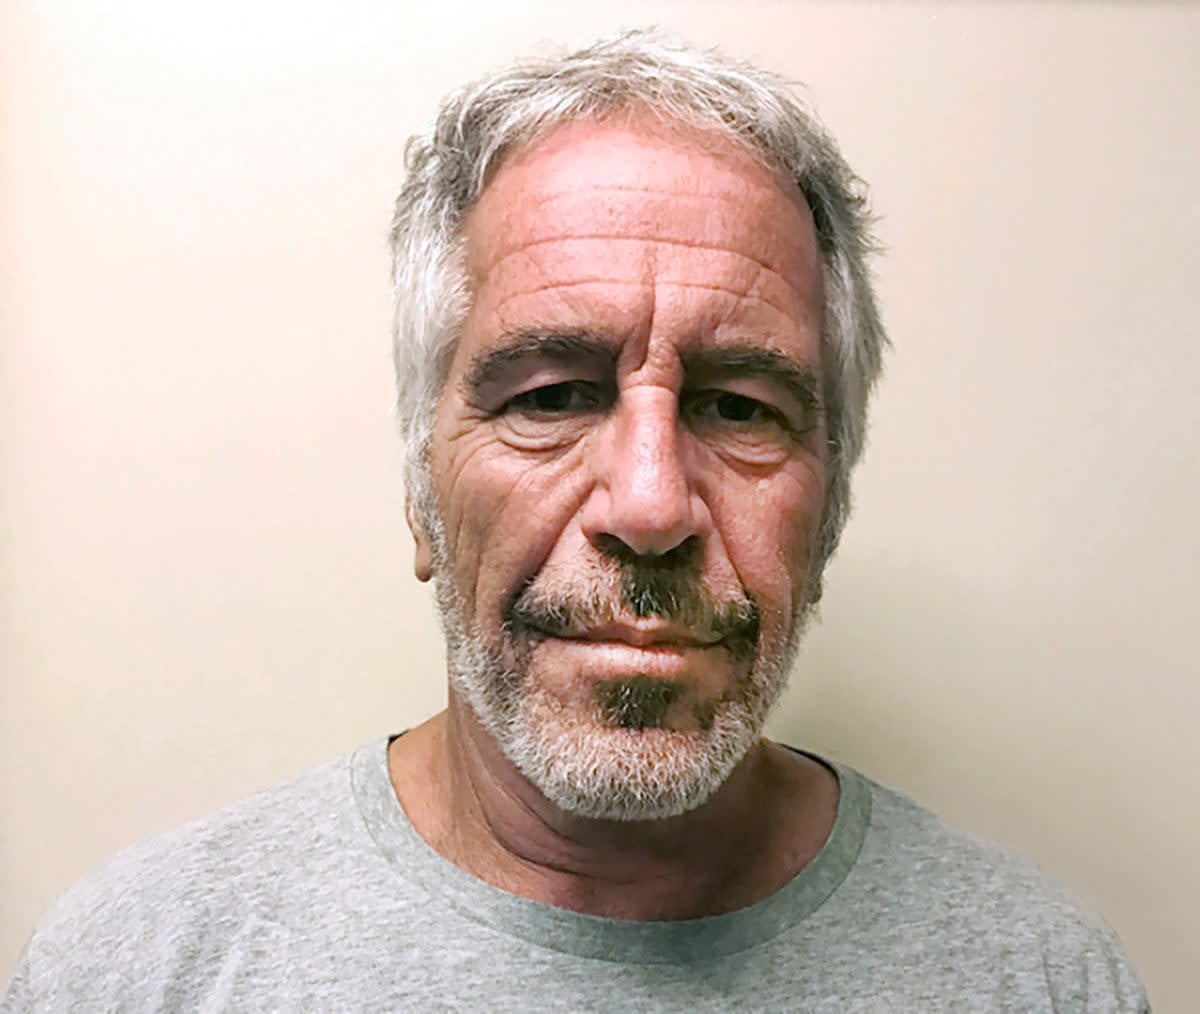 Epstein had ties to many famous names, leading to intrigue as to who else will be mentioned in the files (New York State Sex Offender Registry)